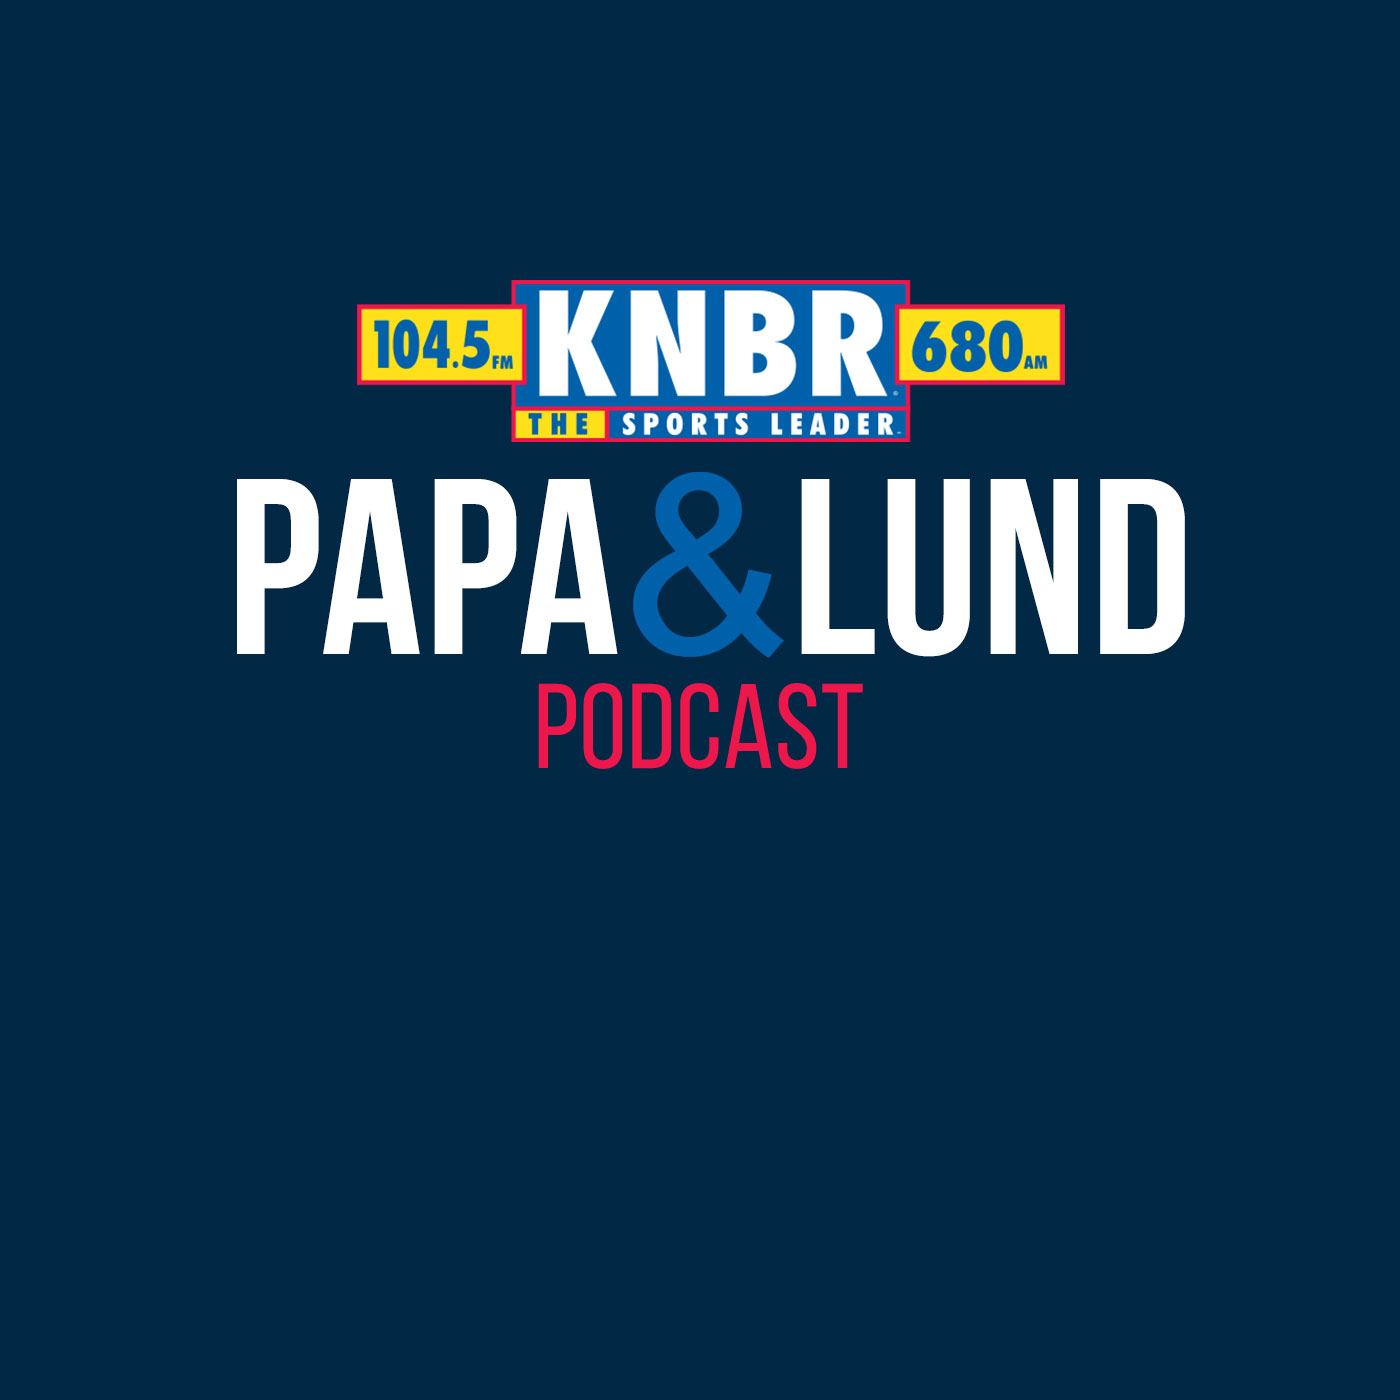 10-19 Tim Ryan joins Papa and Lund for this week's rendition of the "Power Hour" to analyze the 49ers' performance against the Browns